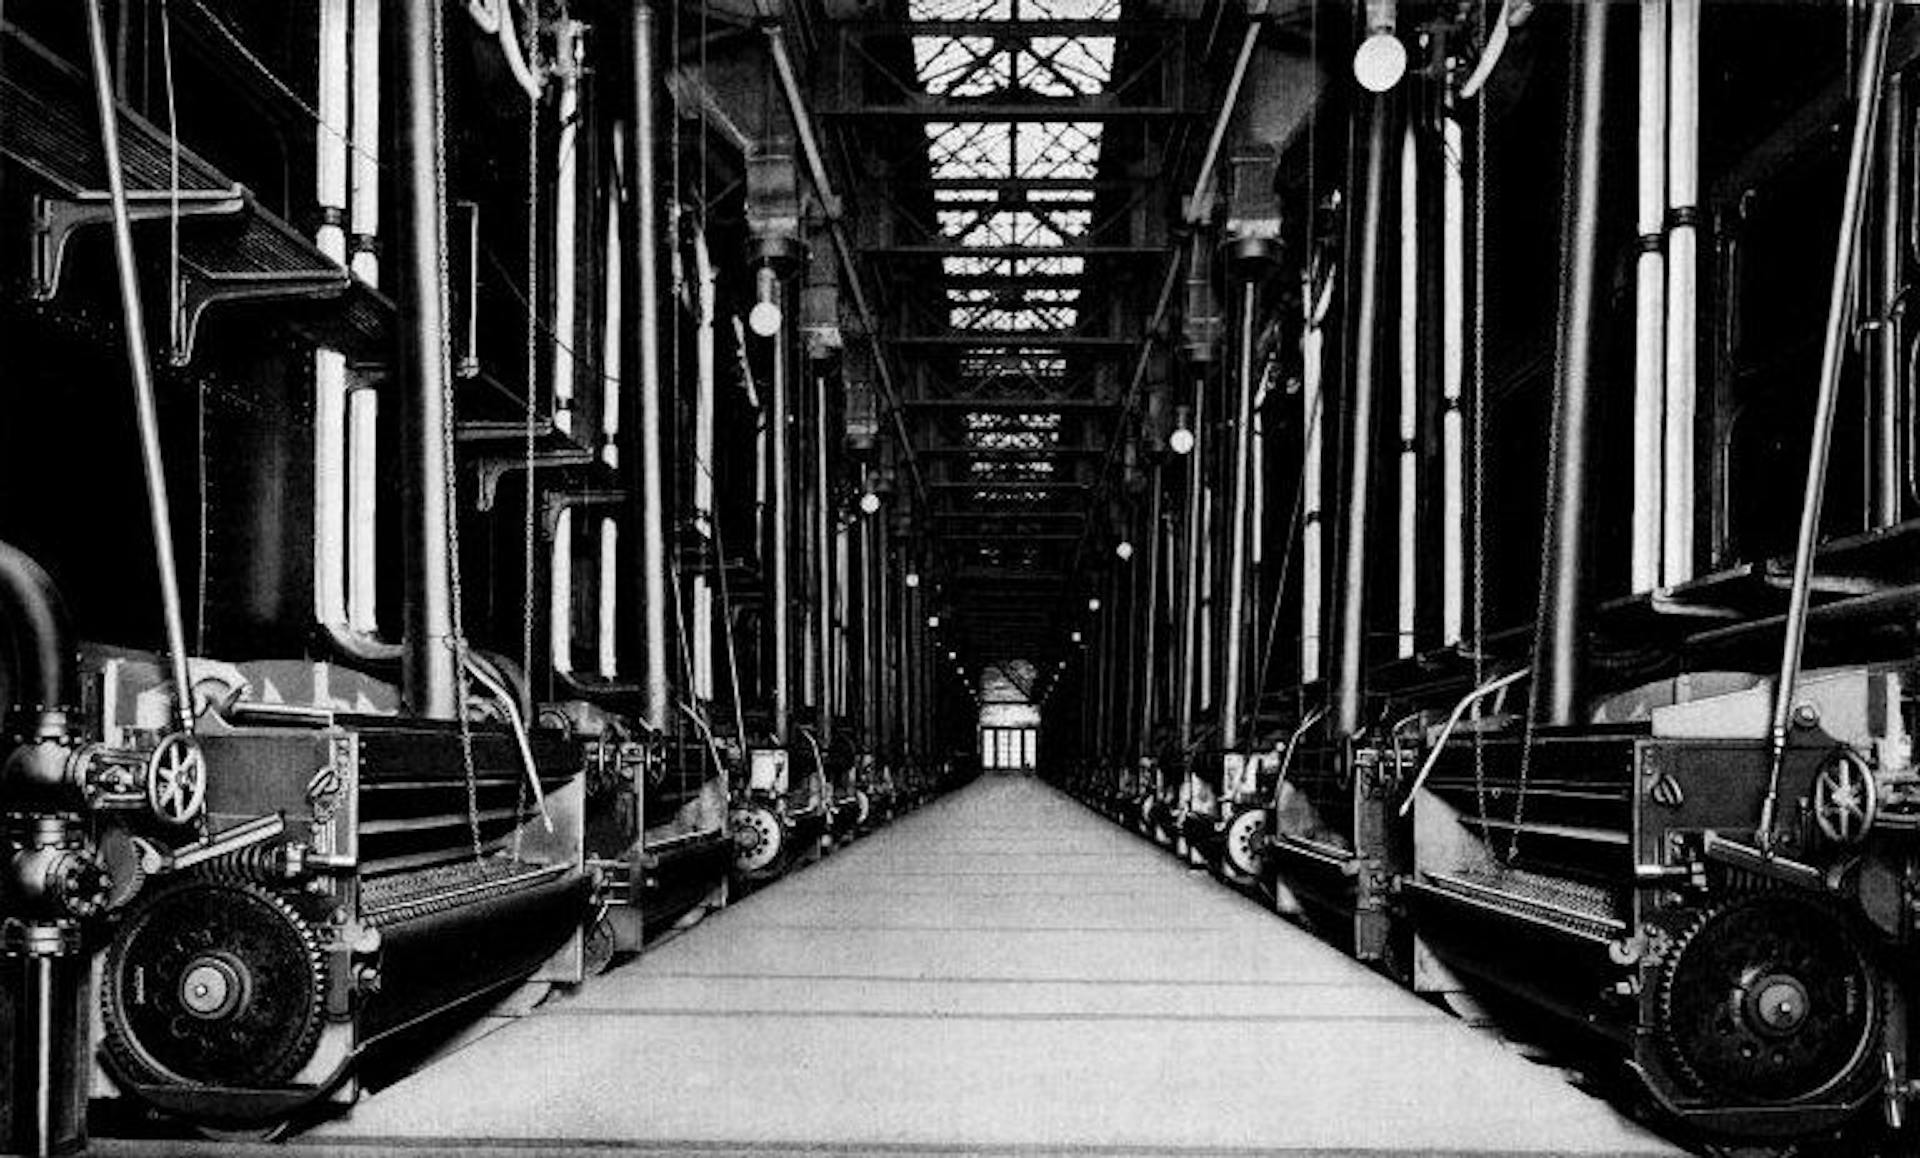 24,420 Horse-power Installation of Babcock & Wilcox Boilers and Superheaters, Equipped with Babcock & Wilcox Chain Grate Stokers in the Quarry Street Station of the Commonwealth Edison Co., Chicago, Ill.